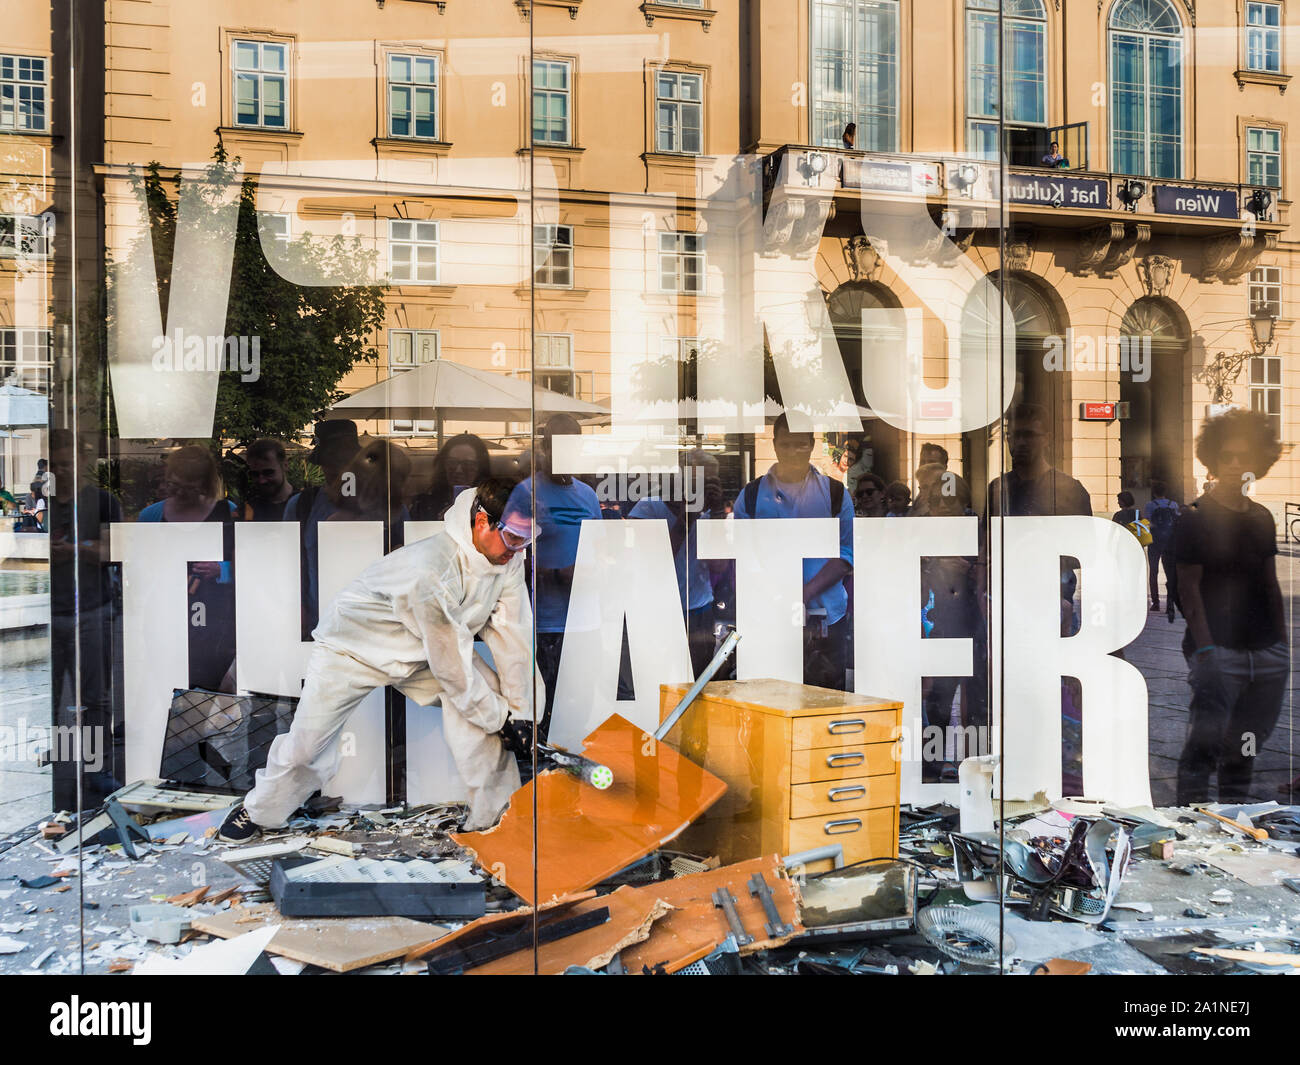 'Volks Theater' (People's Theatre) performer smashing computer equipment in large glass cubicle in Museum Quarter - Vienna, Austria. Stock Photo